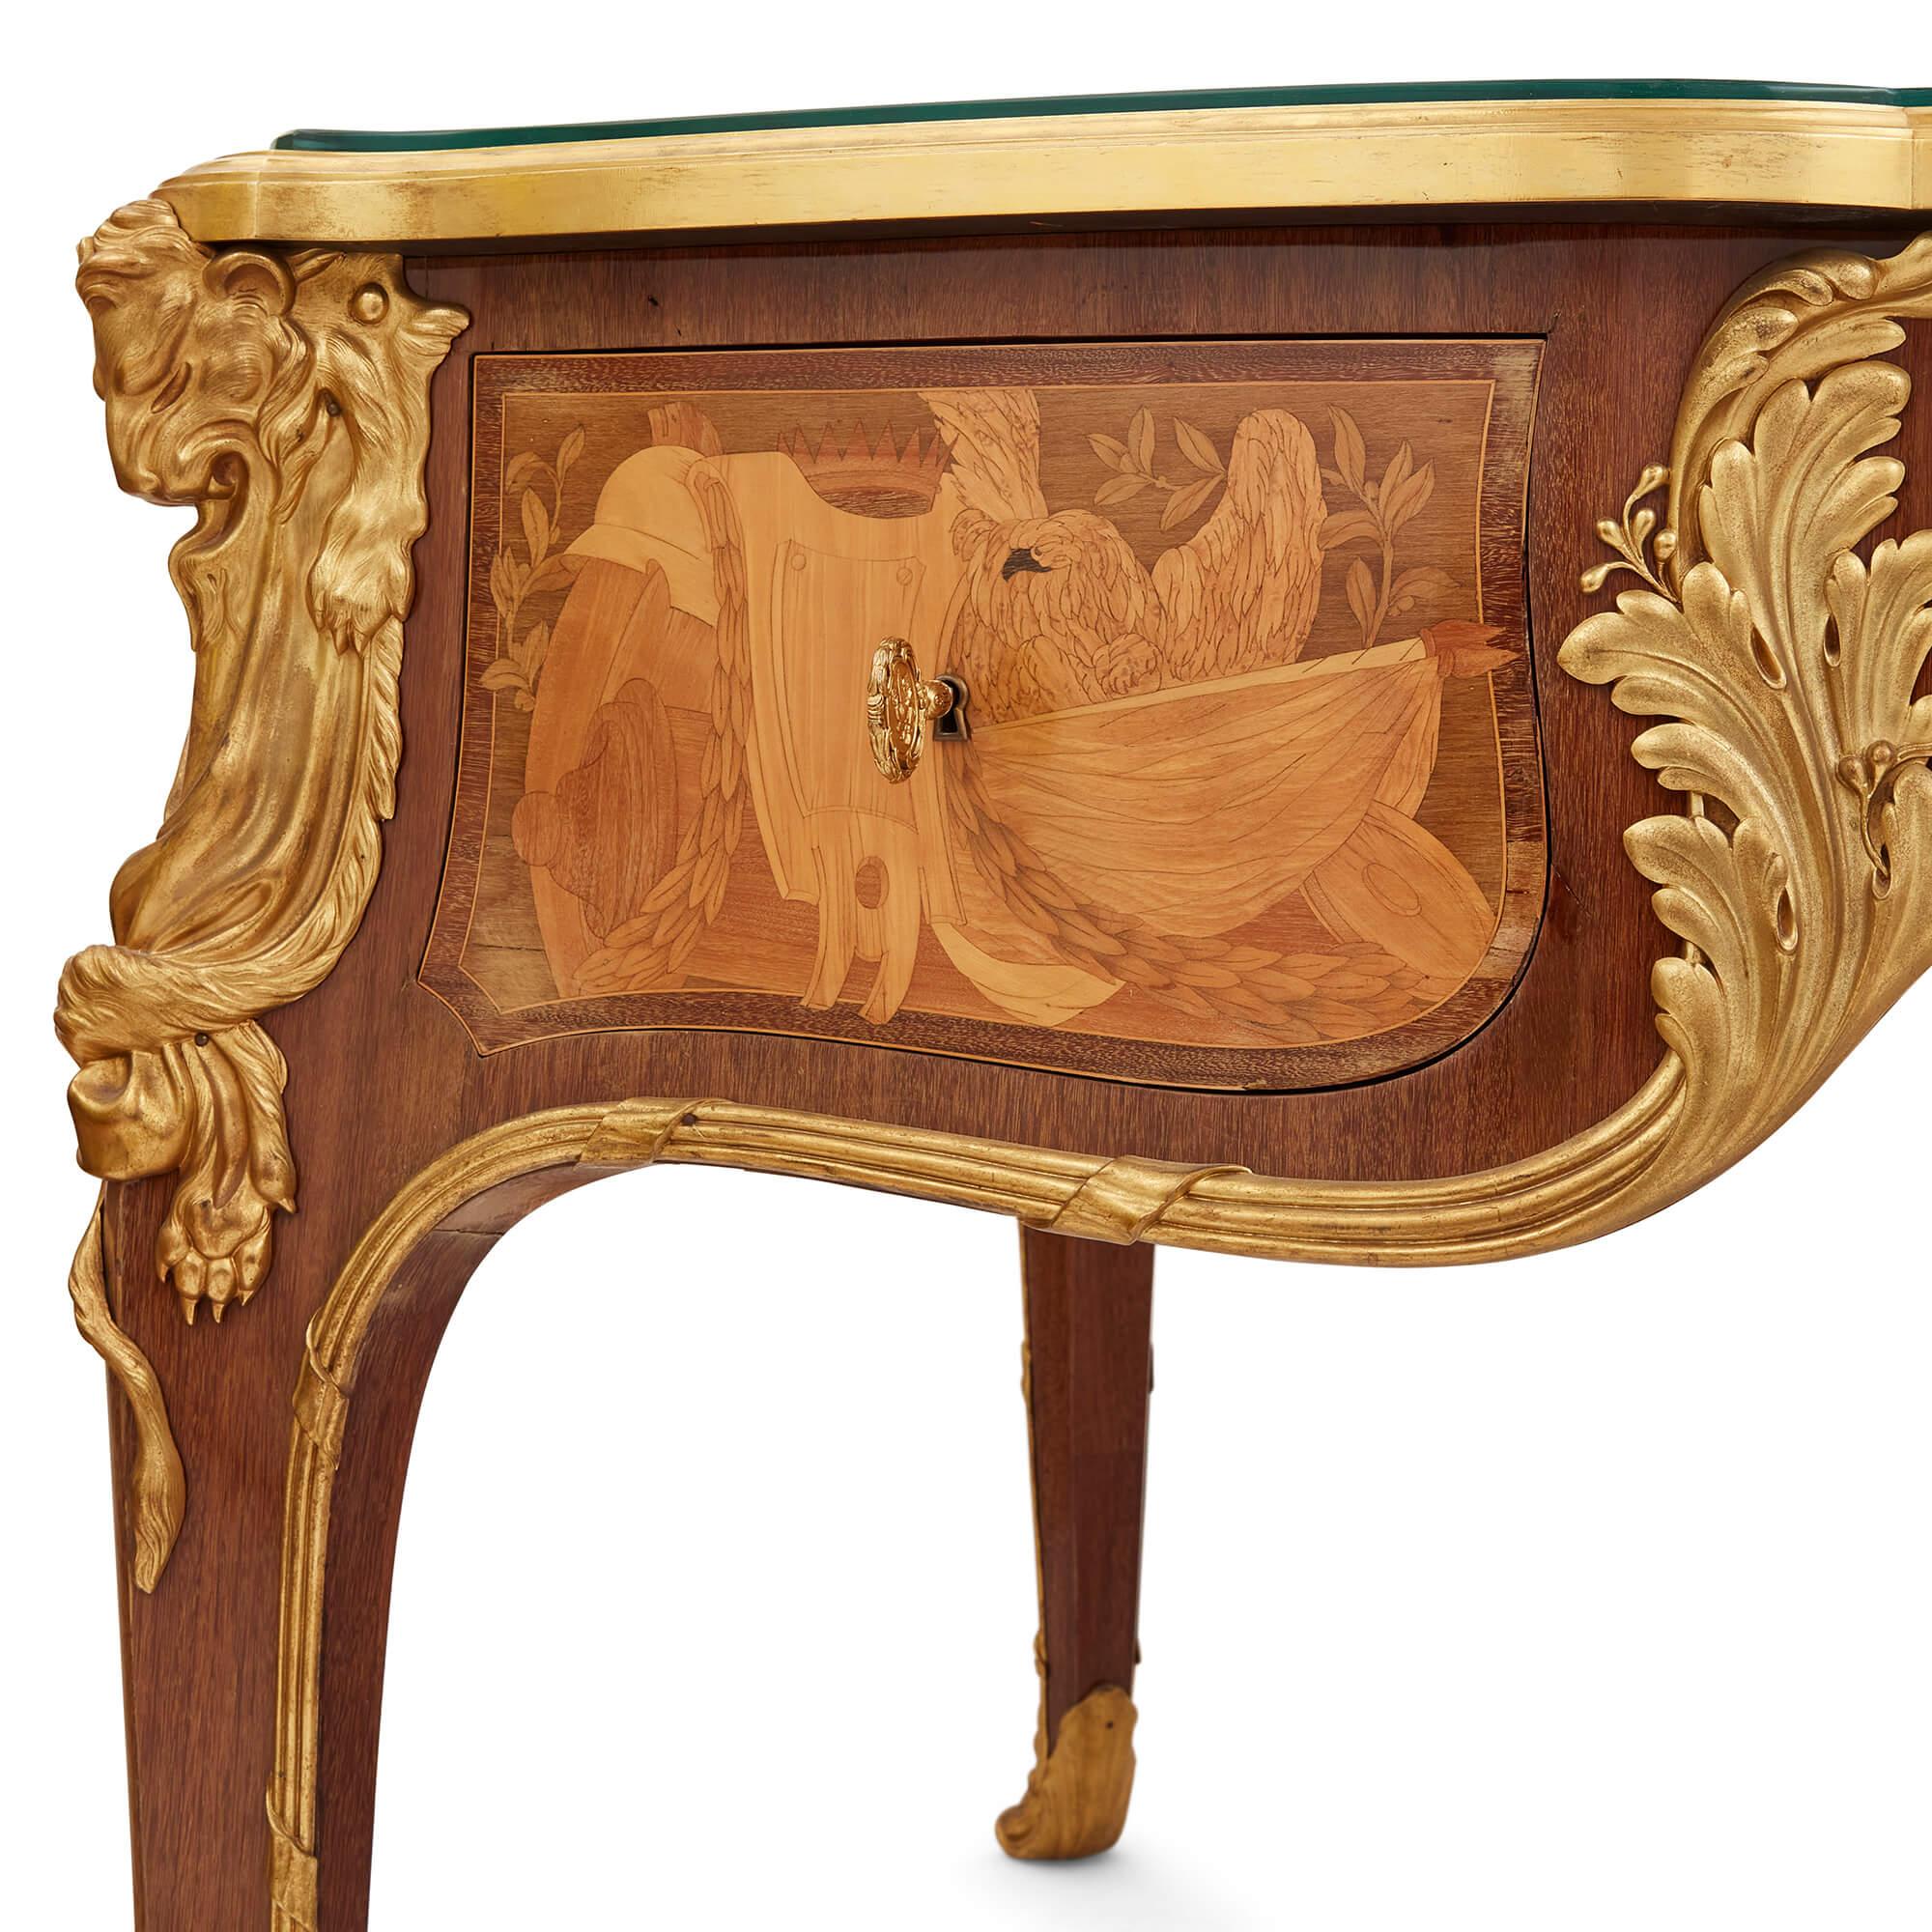 Antique French Louis XV Style Ormolu Mounted Marquetry Desk by Maison Léger For Sale 2